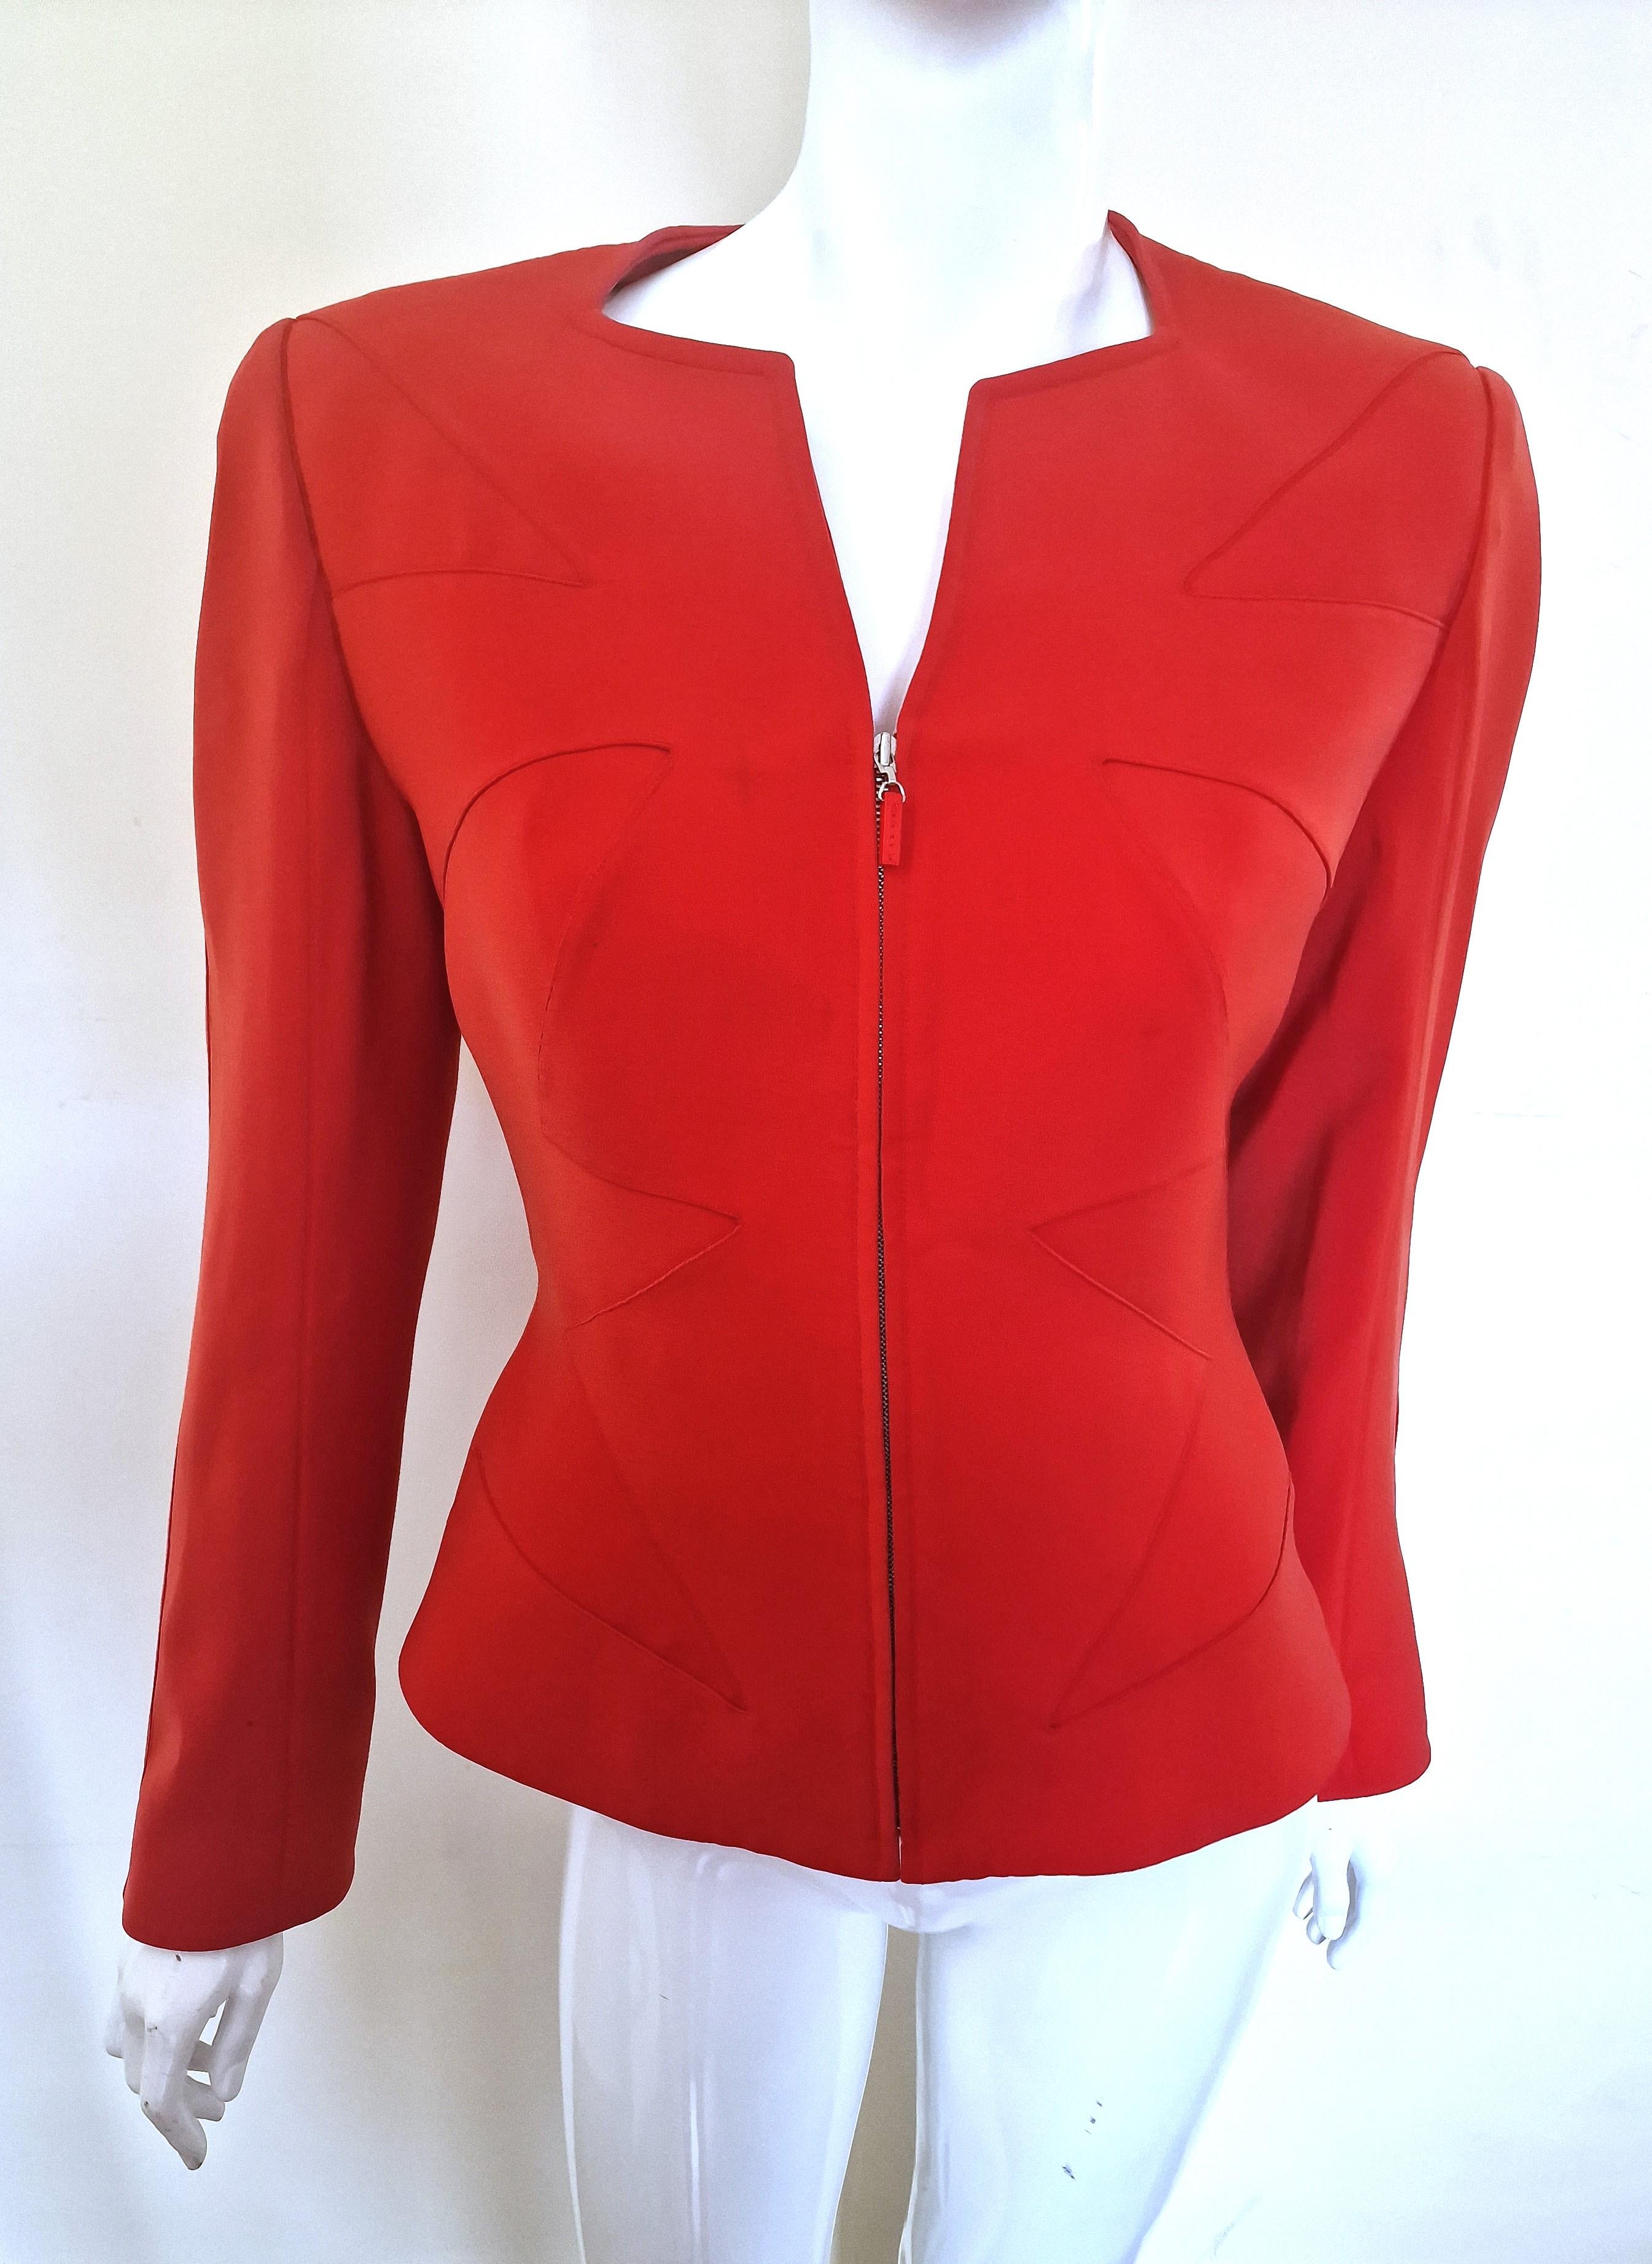 Beautiful jacket by Thierry Mugler!
Star around the waist, it emphasizes your curves and makes it slimmer optically. 
Wonderful silhouette!
With shoulder pads.
With MUGLER zip puller.

VERY GOOD!

SIZE
Medium.
No size label.
Length: 58 cm / 22.8